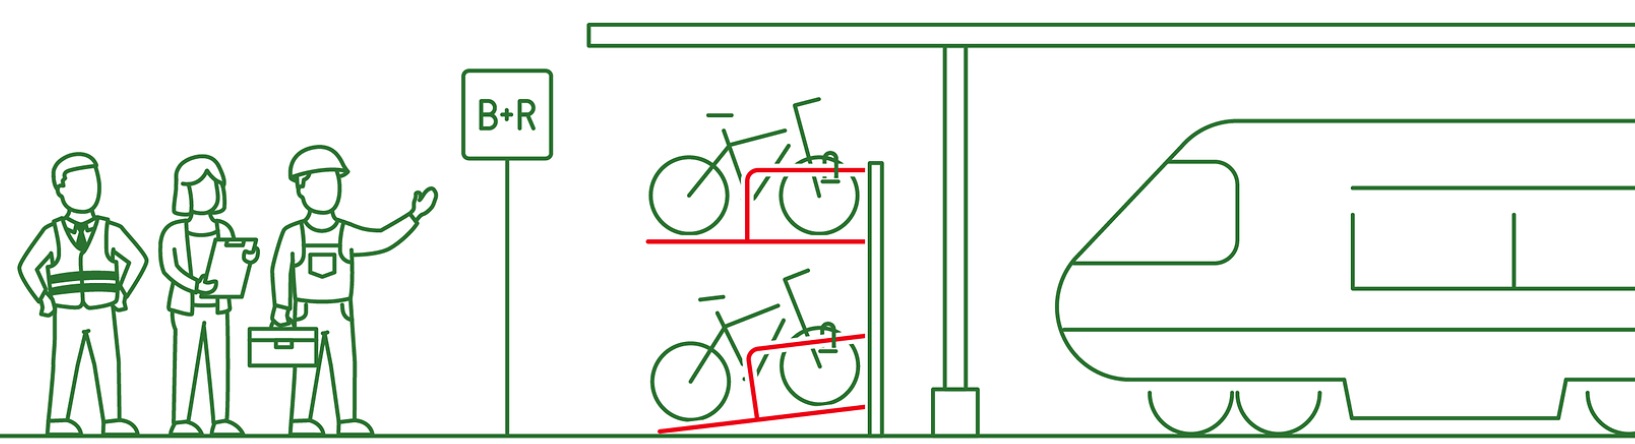 Drawing bicycle parking spaces at the main station